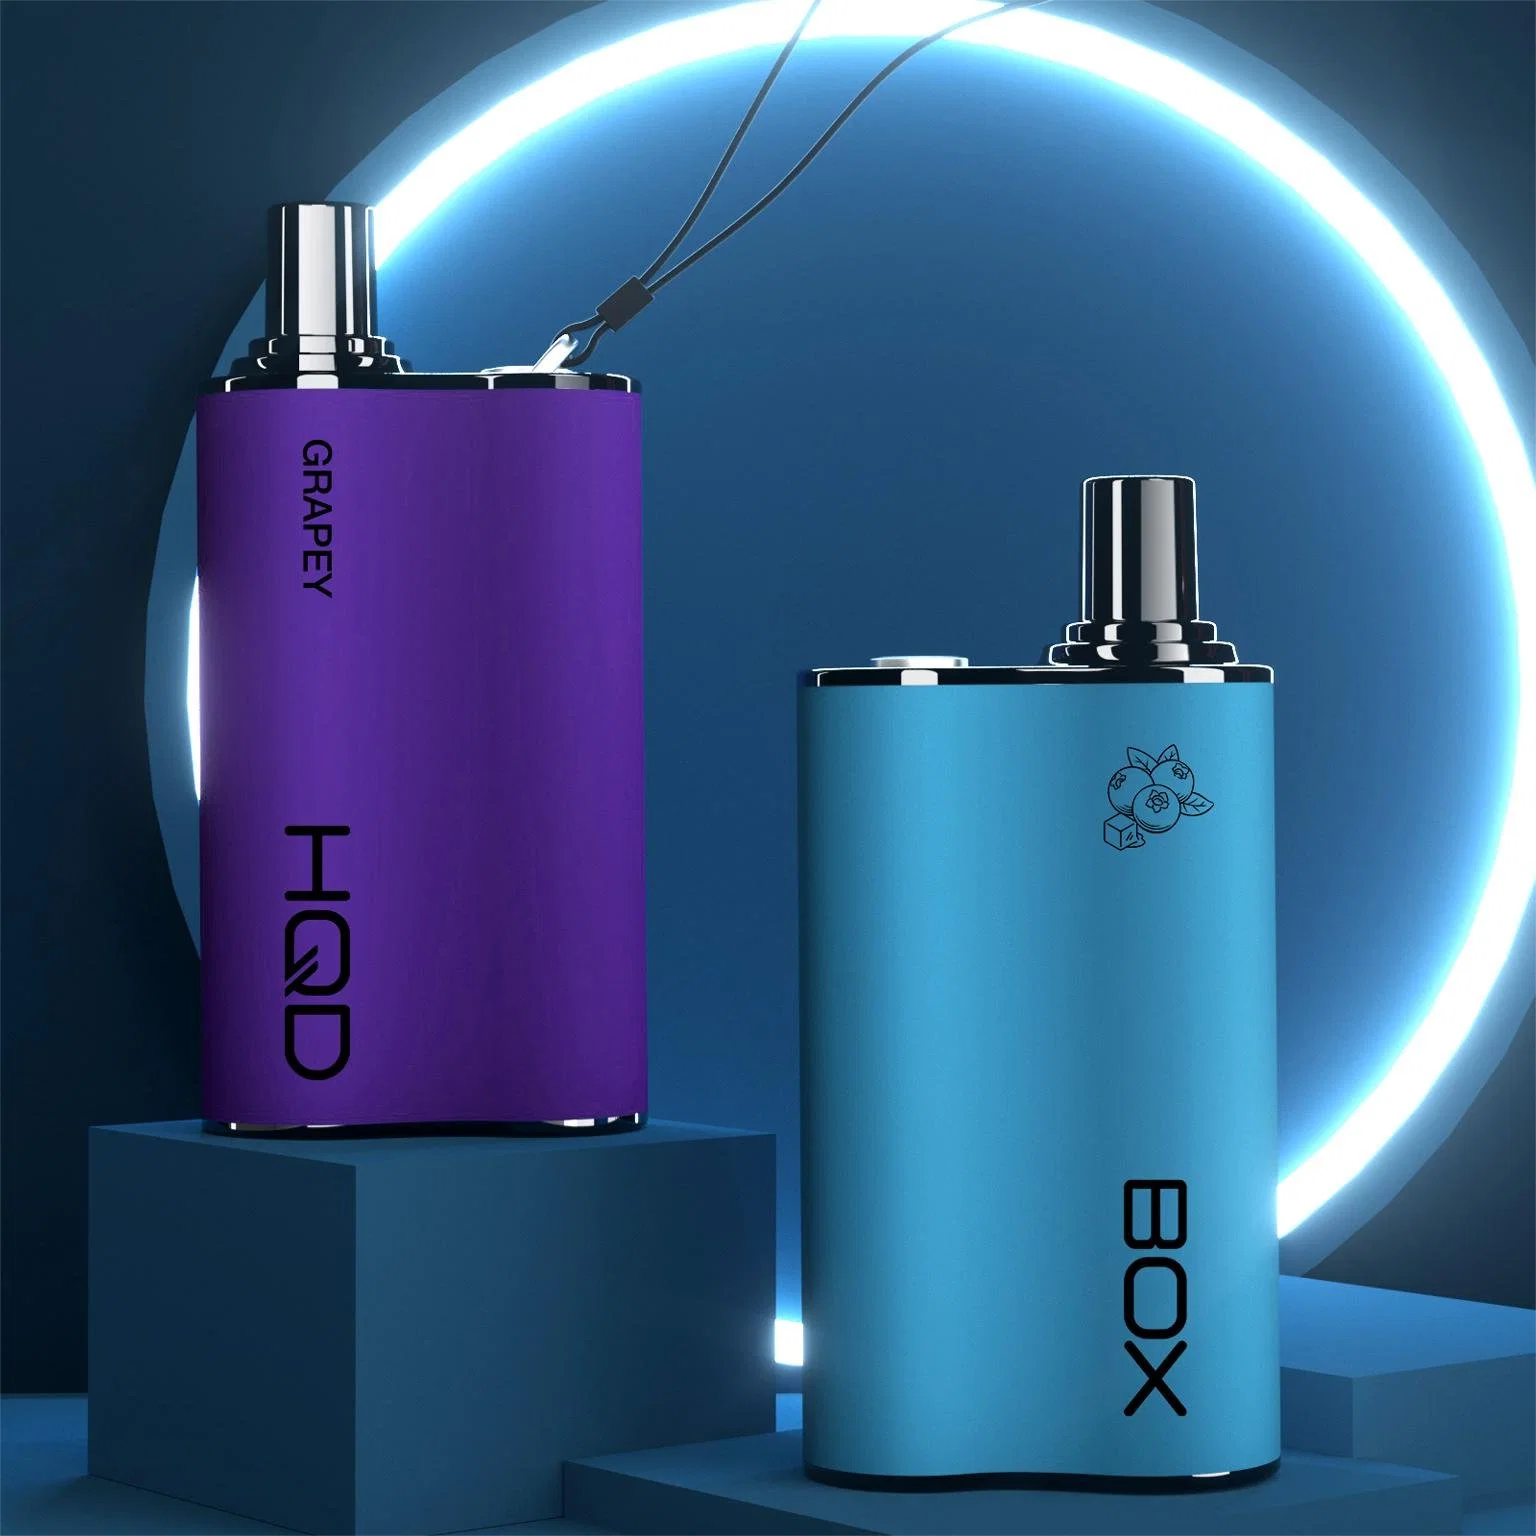 Hqd Cuvie Box 5500 Puffs Disposable/Chargeable Vape Pen Disposable/Chargeable Pod Device Vape Pen Original Factory Nicotine Content Vape Device Electronic Cigarette